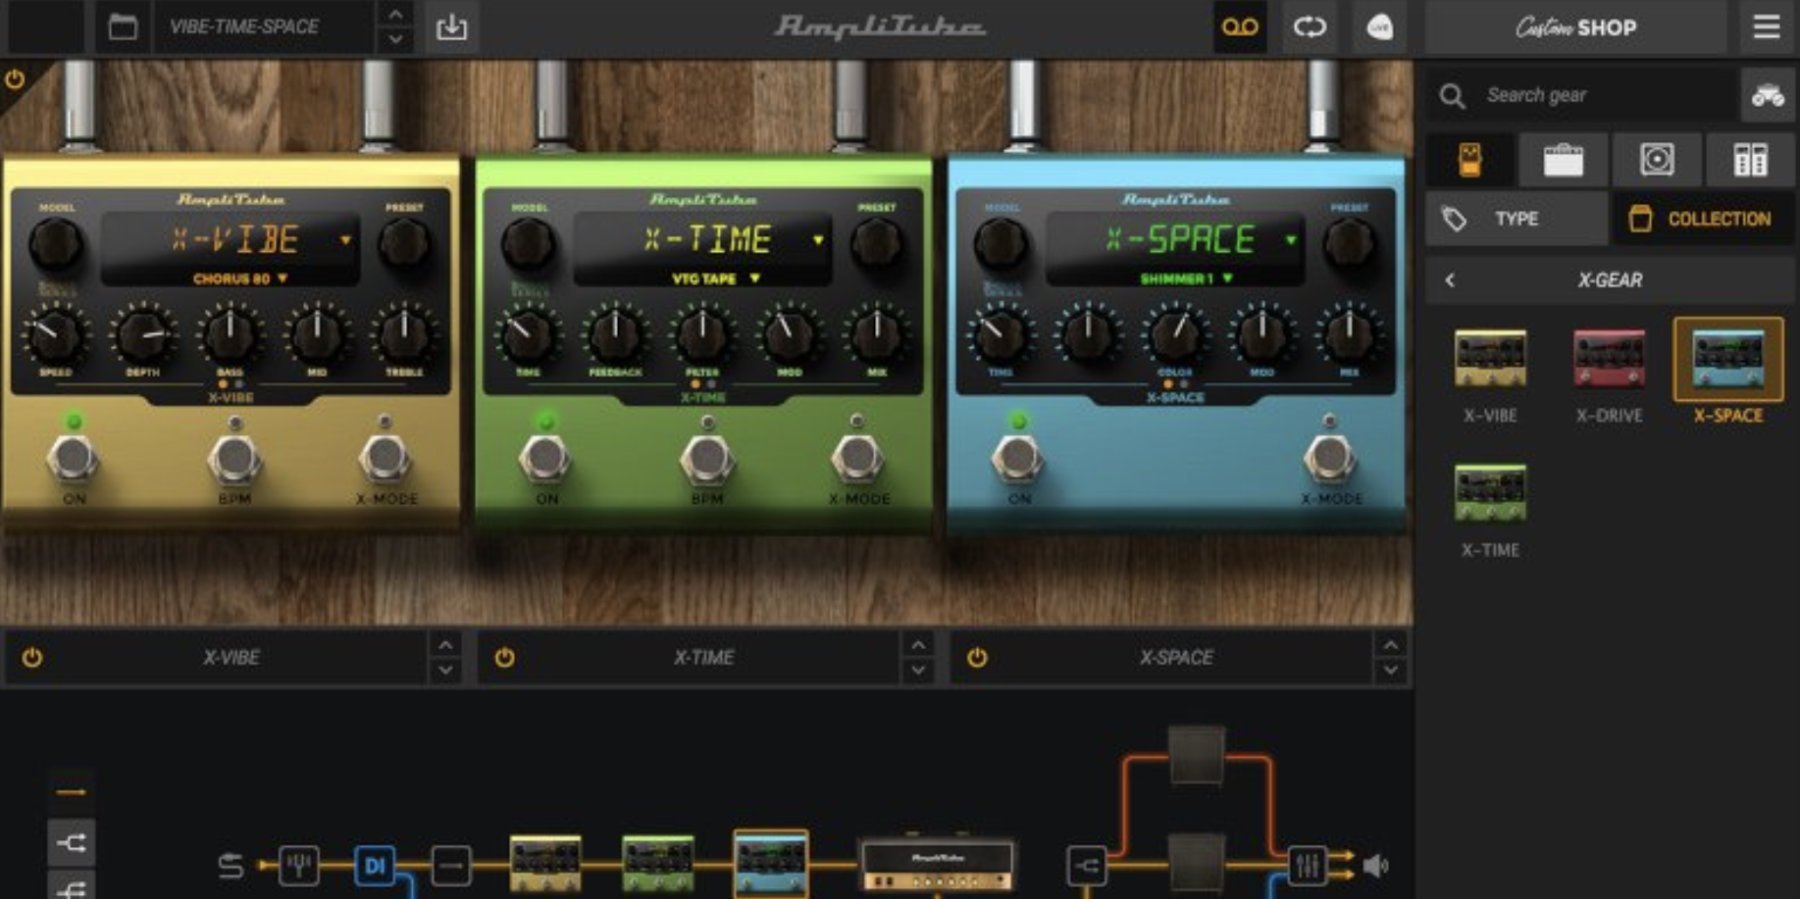 Mer information om "Virtual versions of the new X-GEAR guitar pedals now available in AmpliTube 5"